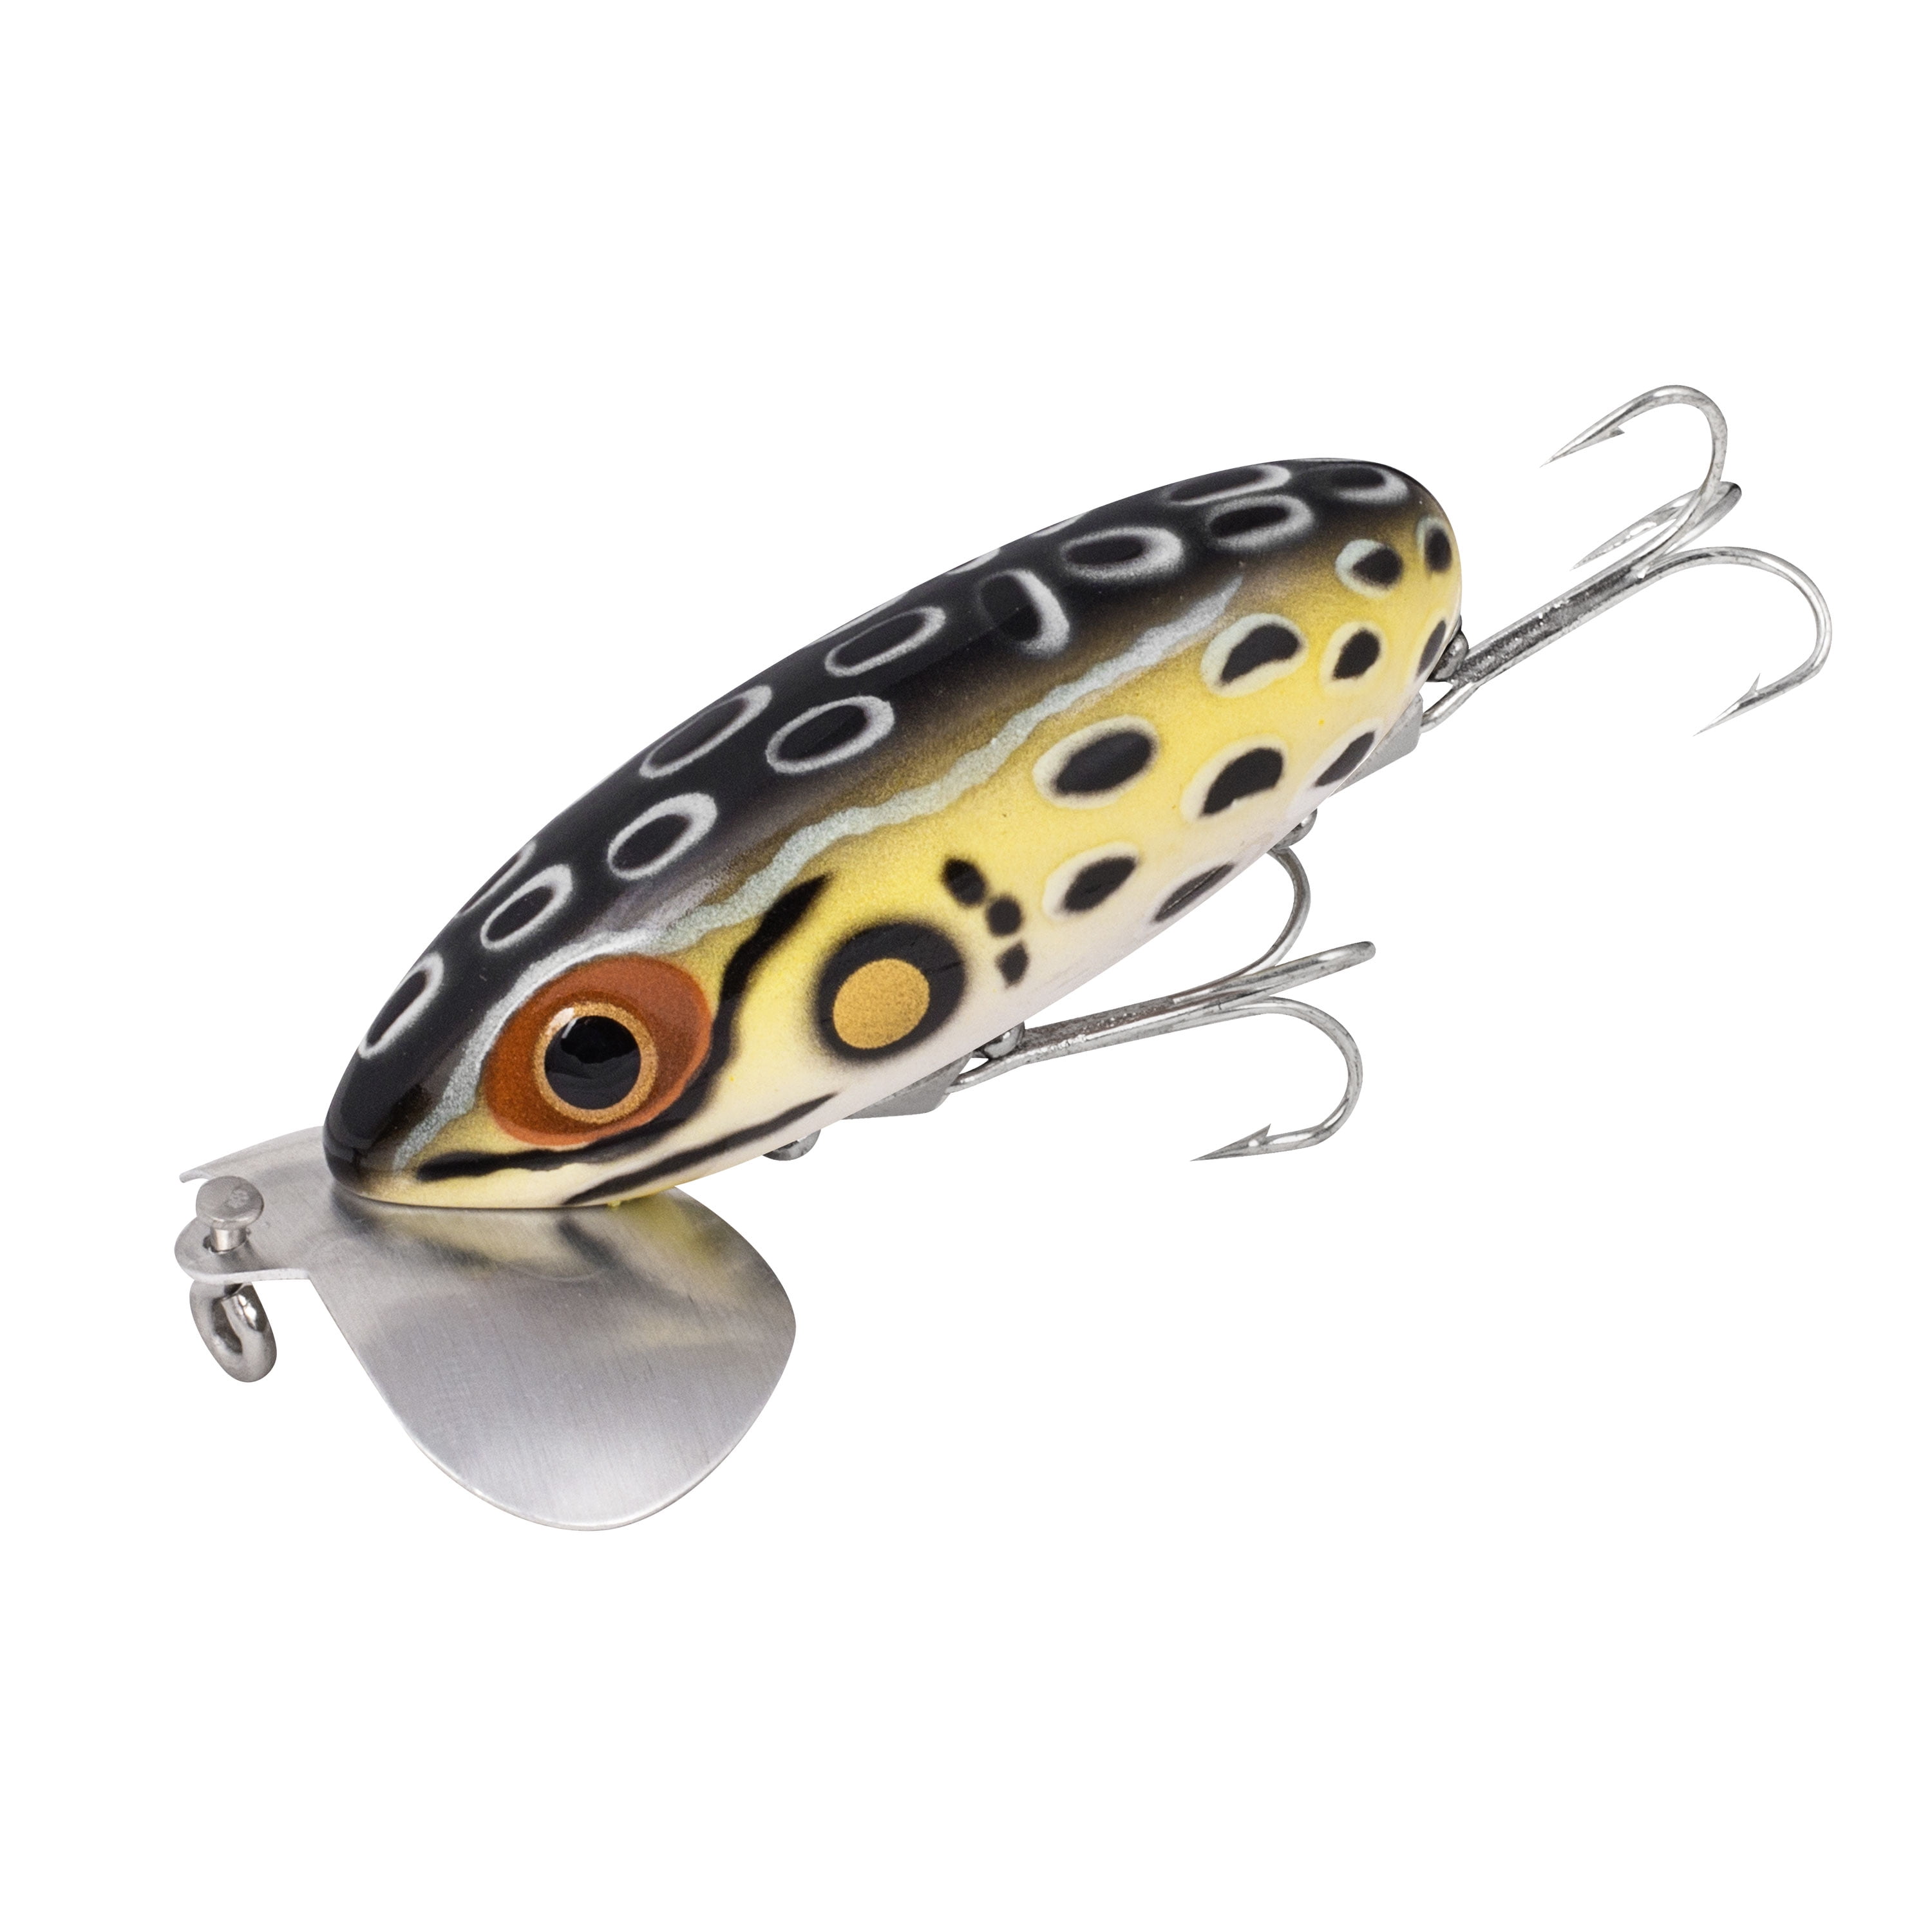  Arbogast Jitterbug Topwater Bass Fishing Lure - Excellent  For Night Fishing, Wounded Coach Dog, G630